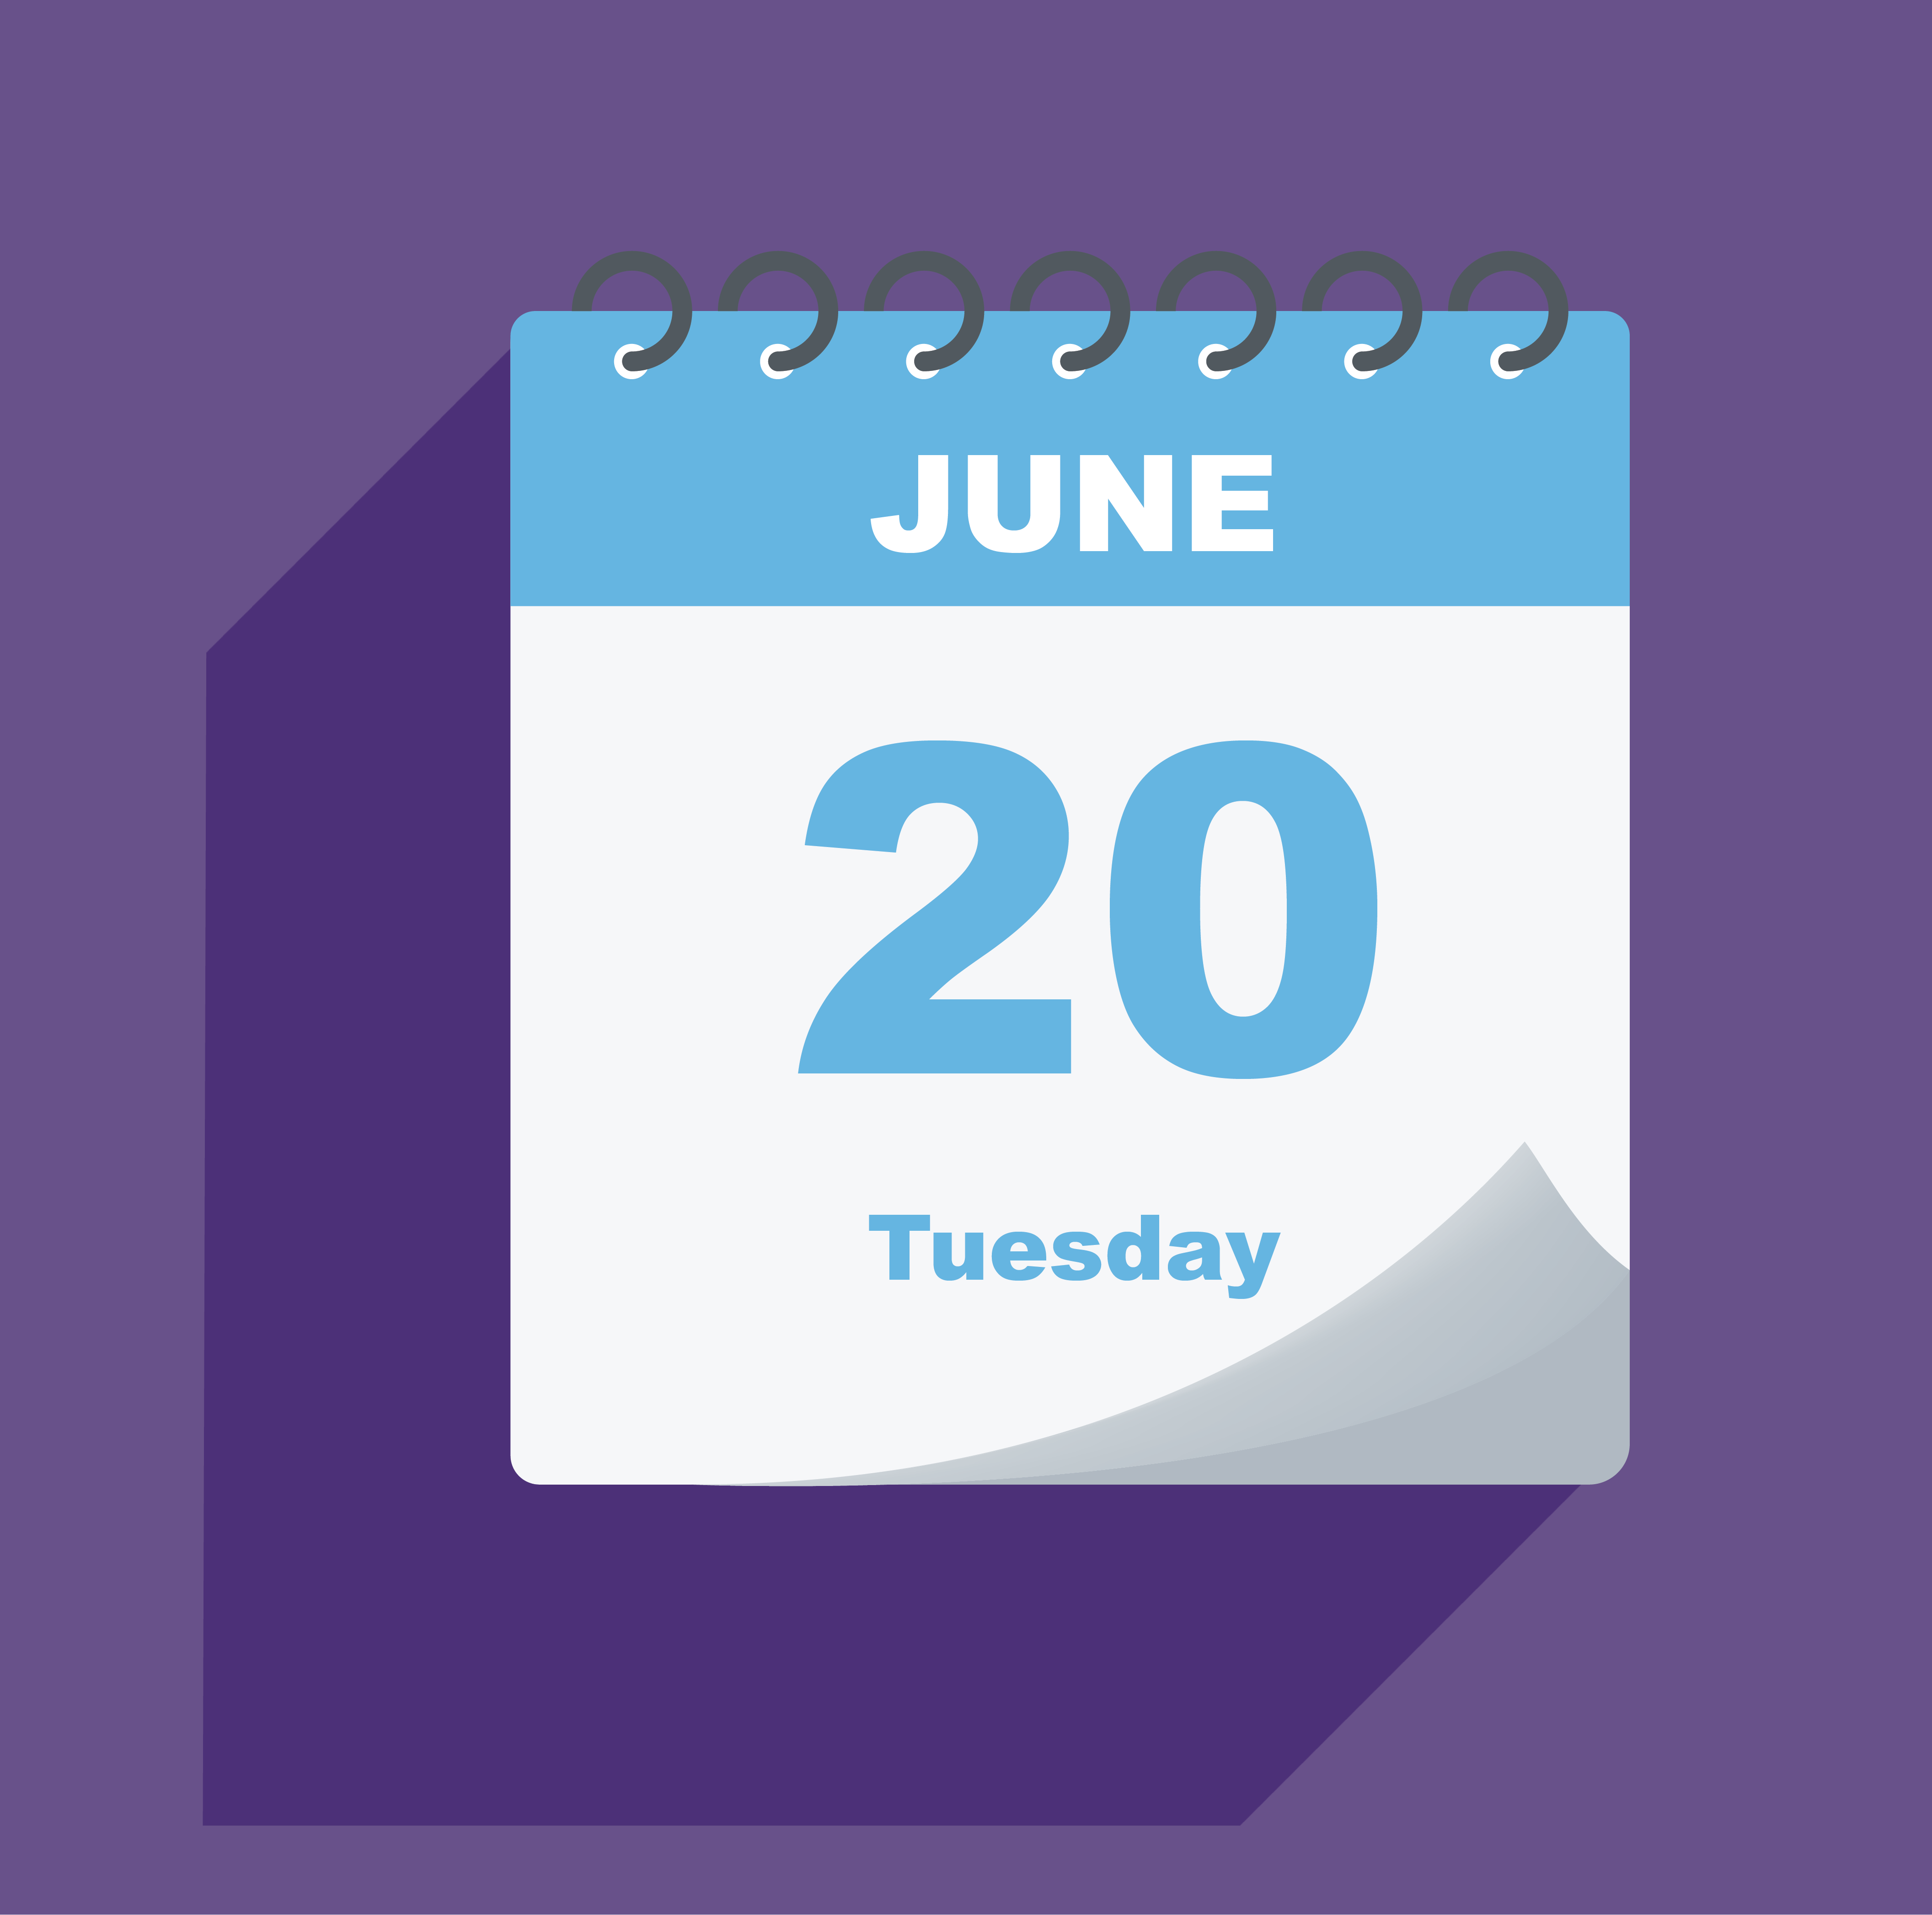 June 20th - Election Day Date Calendar for Ranked Choice Voting in the Arlington Democratic Primary for Arlington County Board